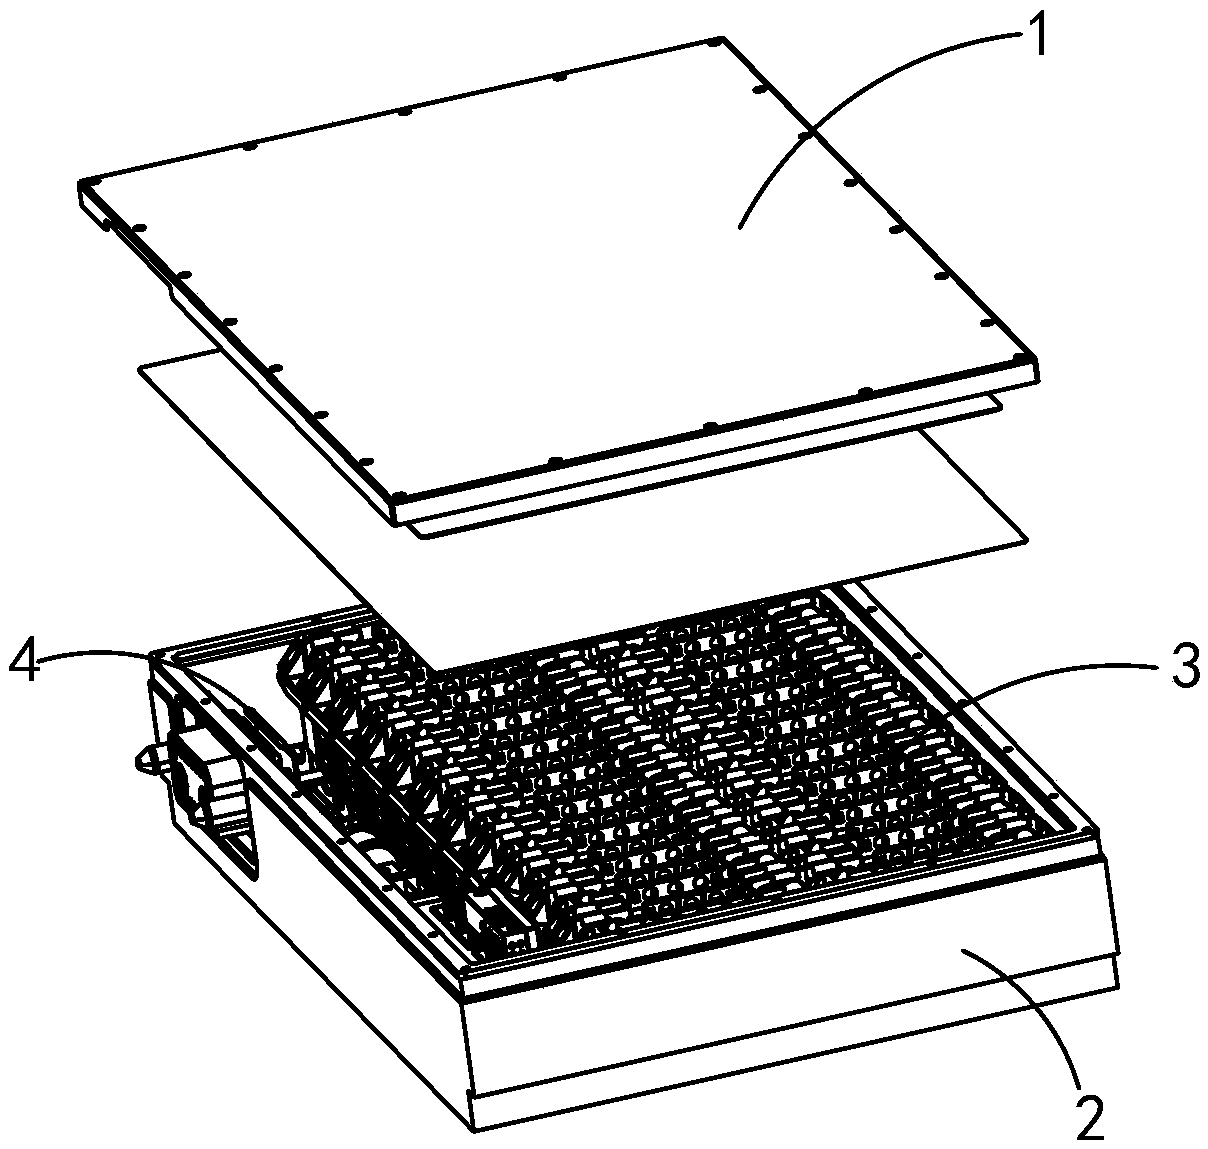 Battery box for electric vehicle